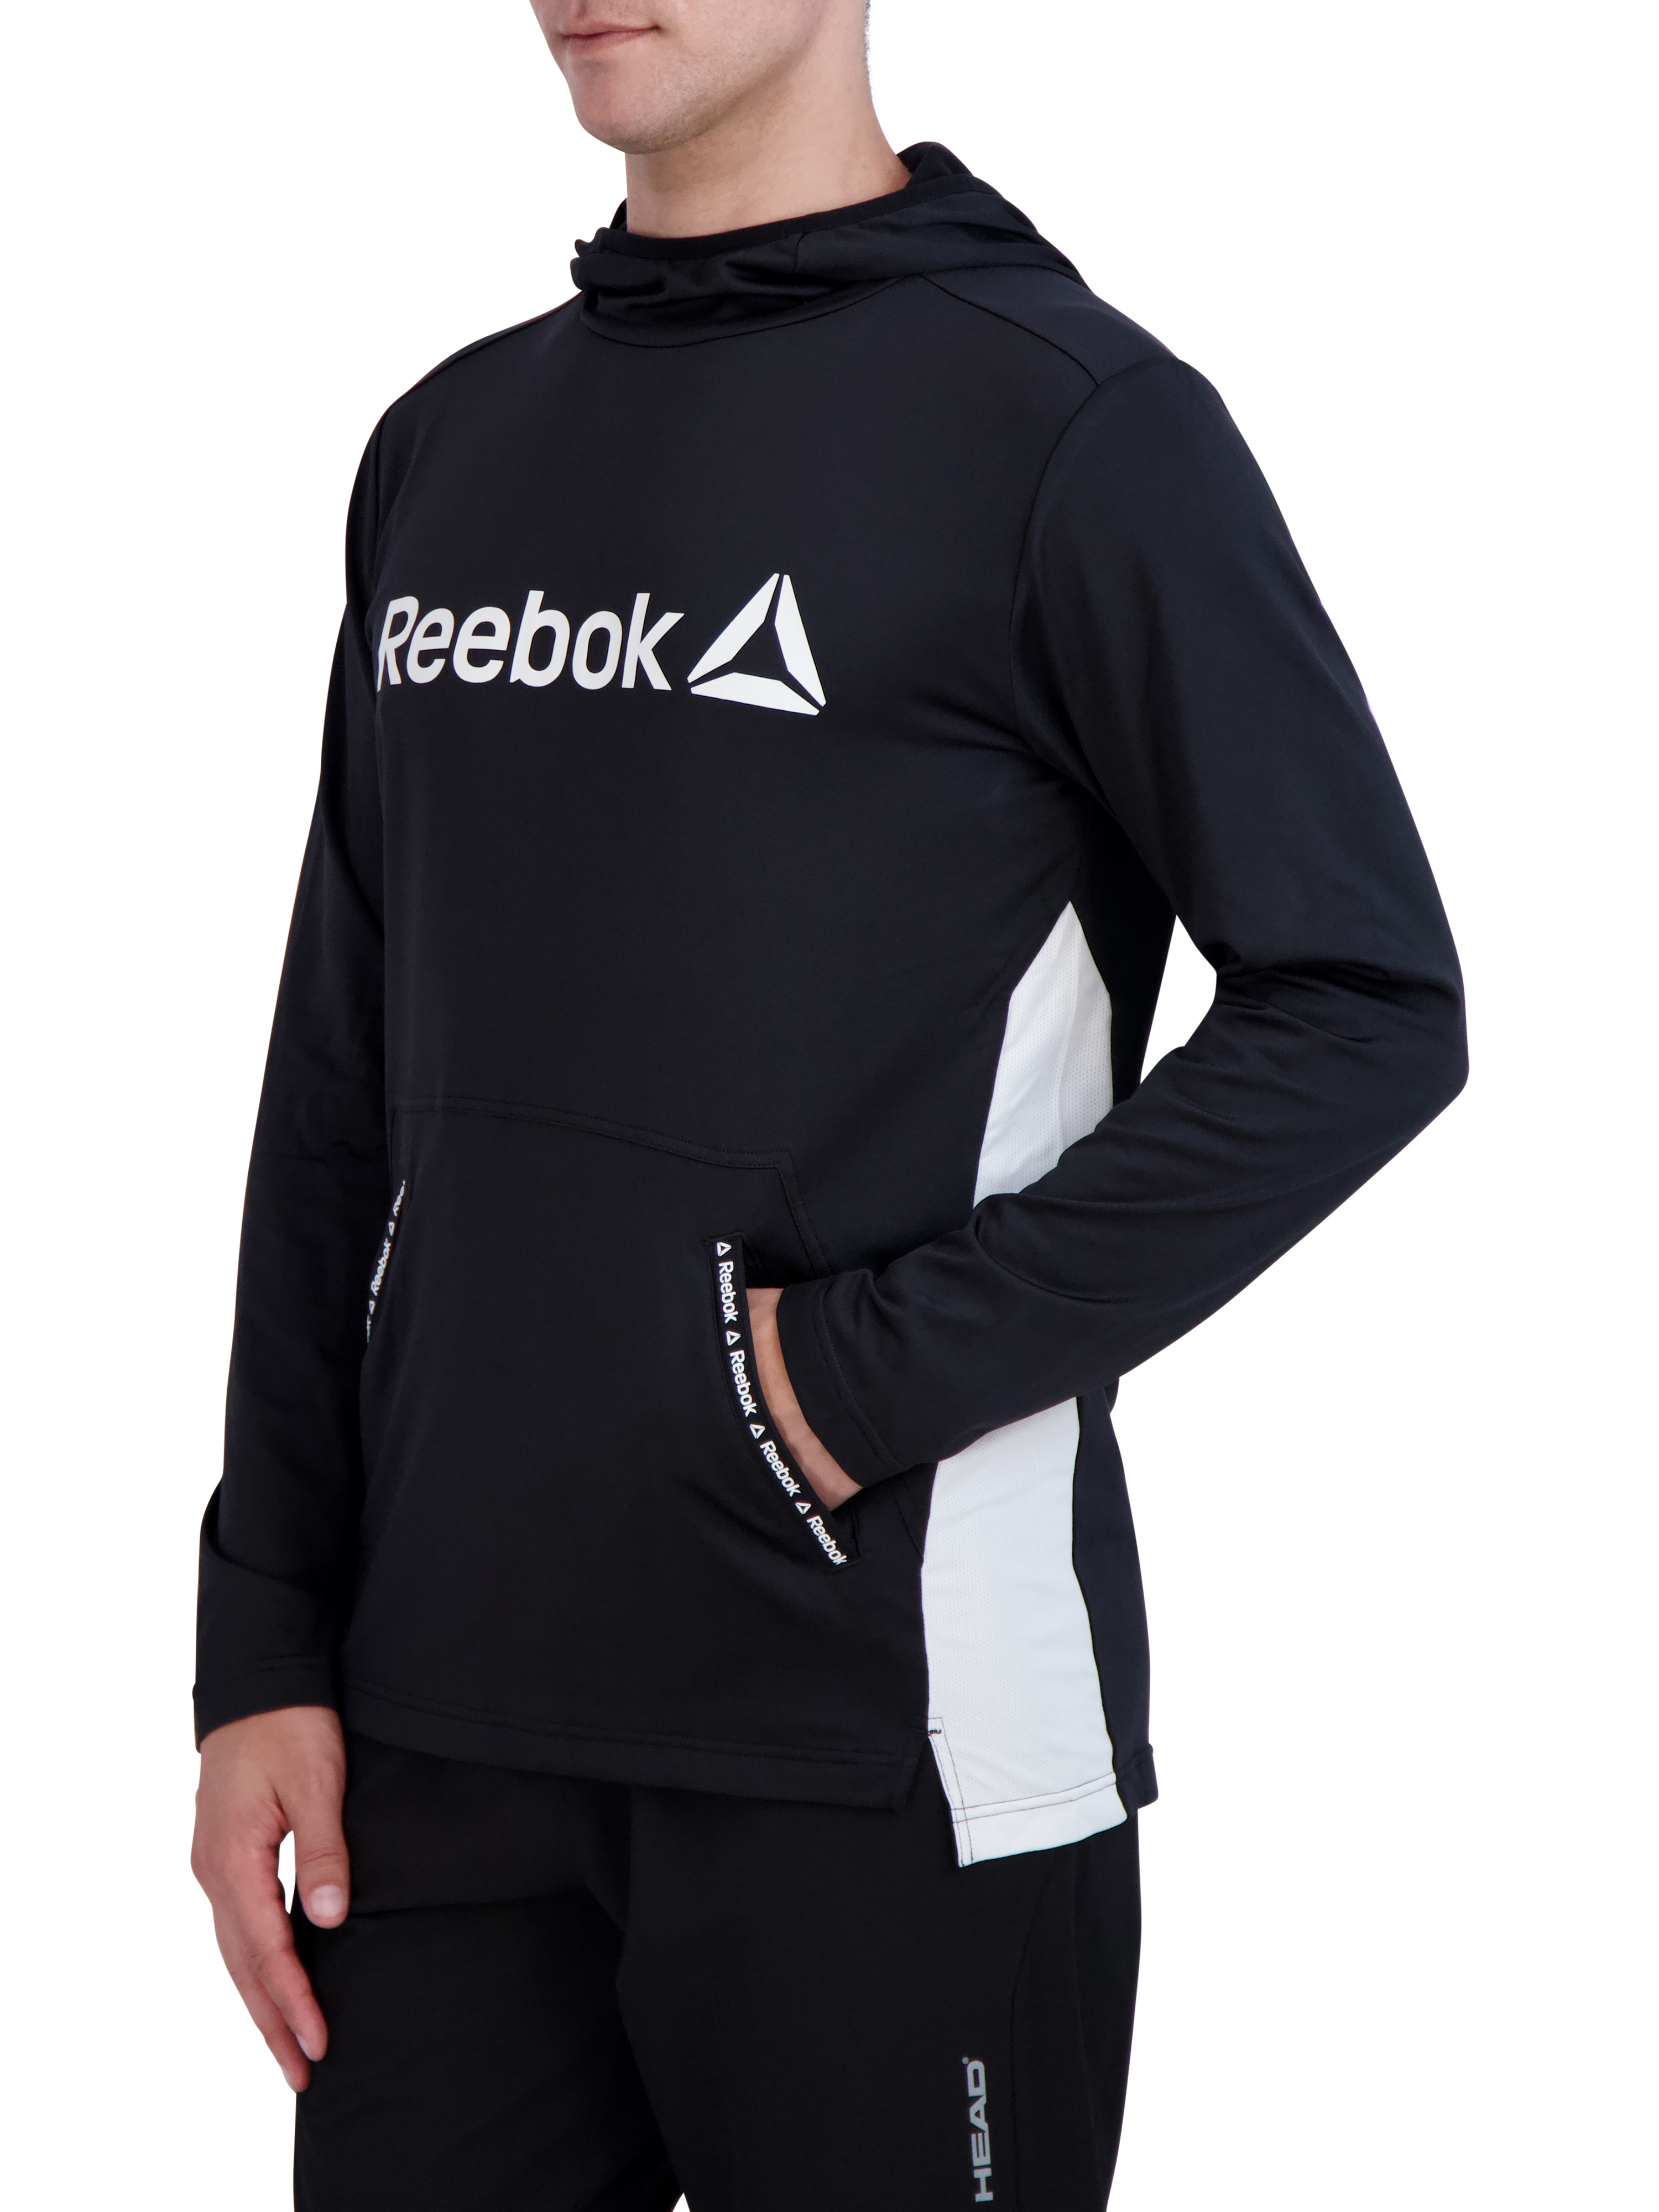 Reebok Men's Pullover Hoodie, up to Size 3XL - image 4 of 6